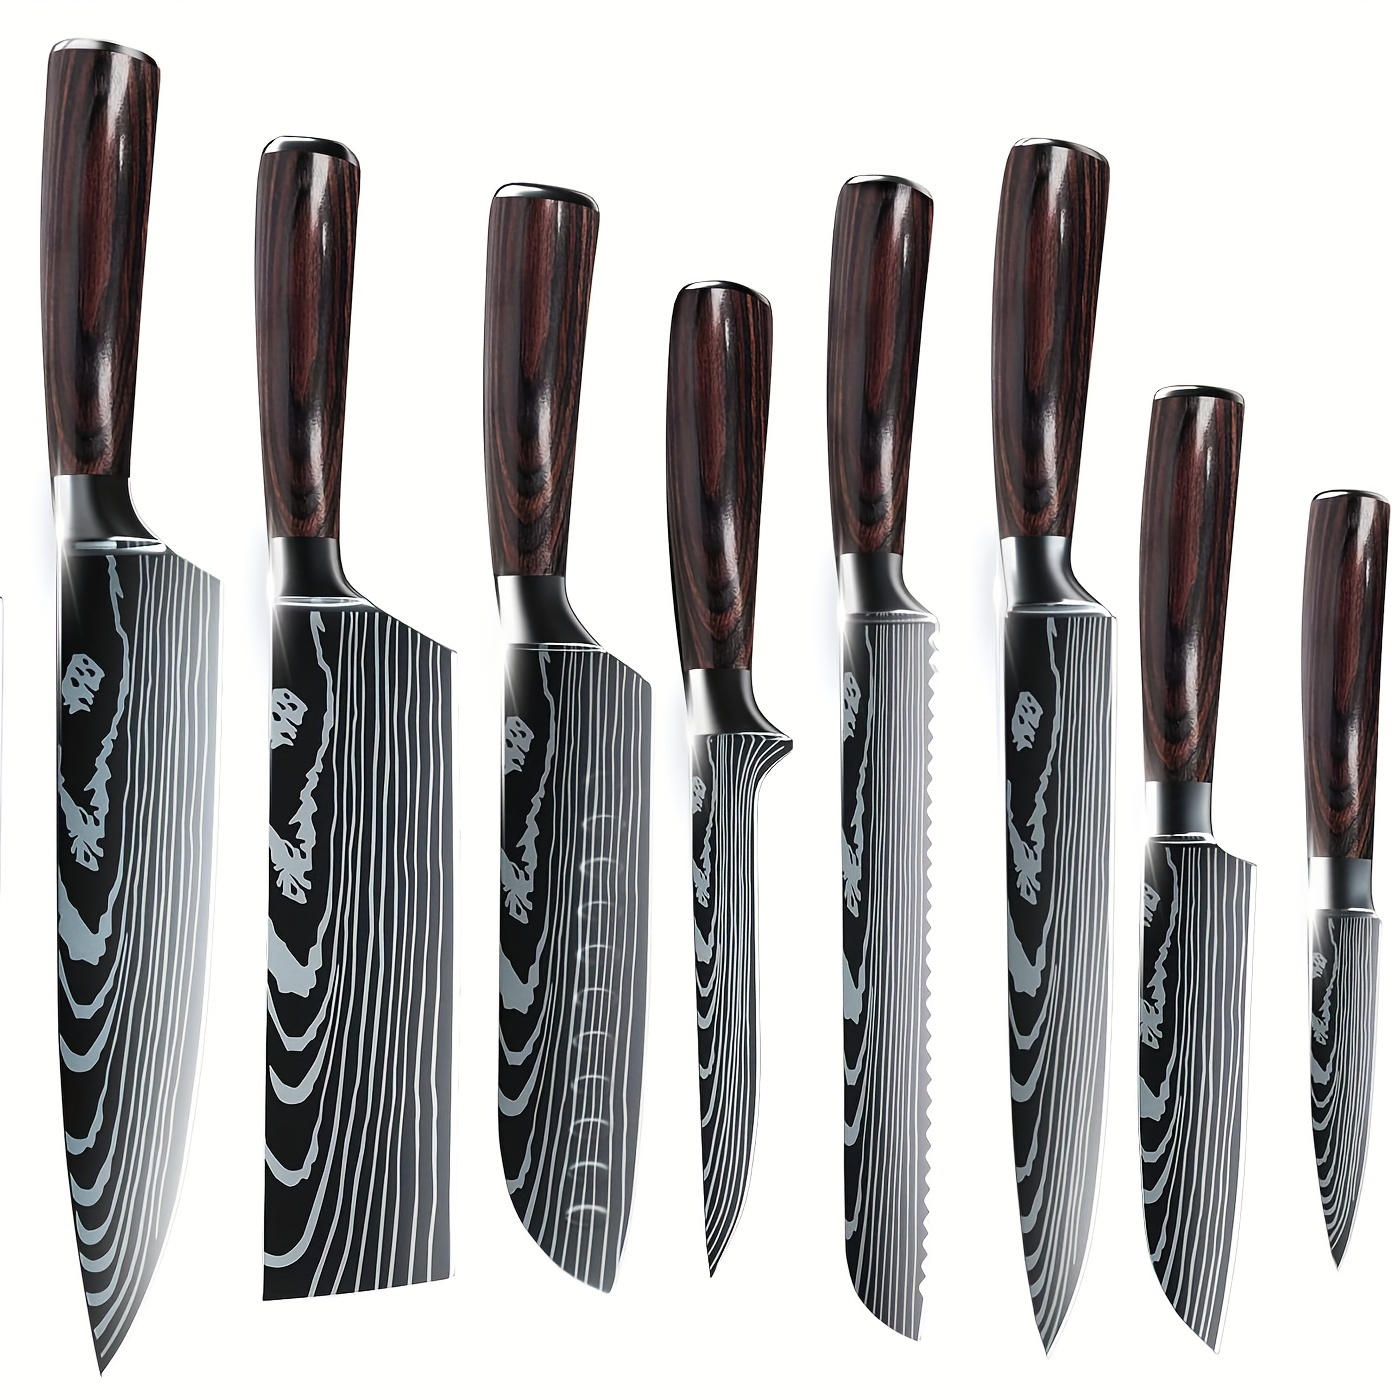 

Pofessional Kitchen Chef Knife Set, Japanese 8 Pcs German High Carbon Stainless Steel Ultra Sharp Knives Sets With Sheaths, Ergonomically Pakkawood Handle Multifunctional Cutter